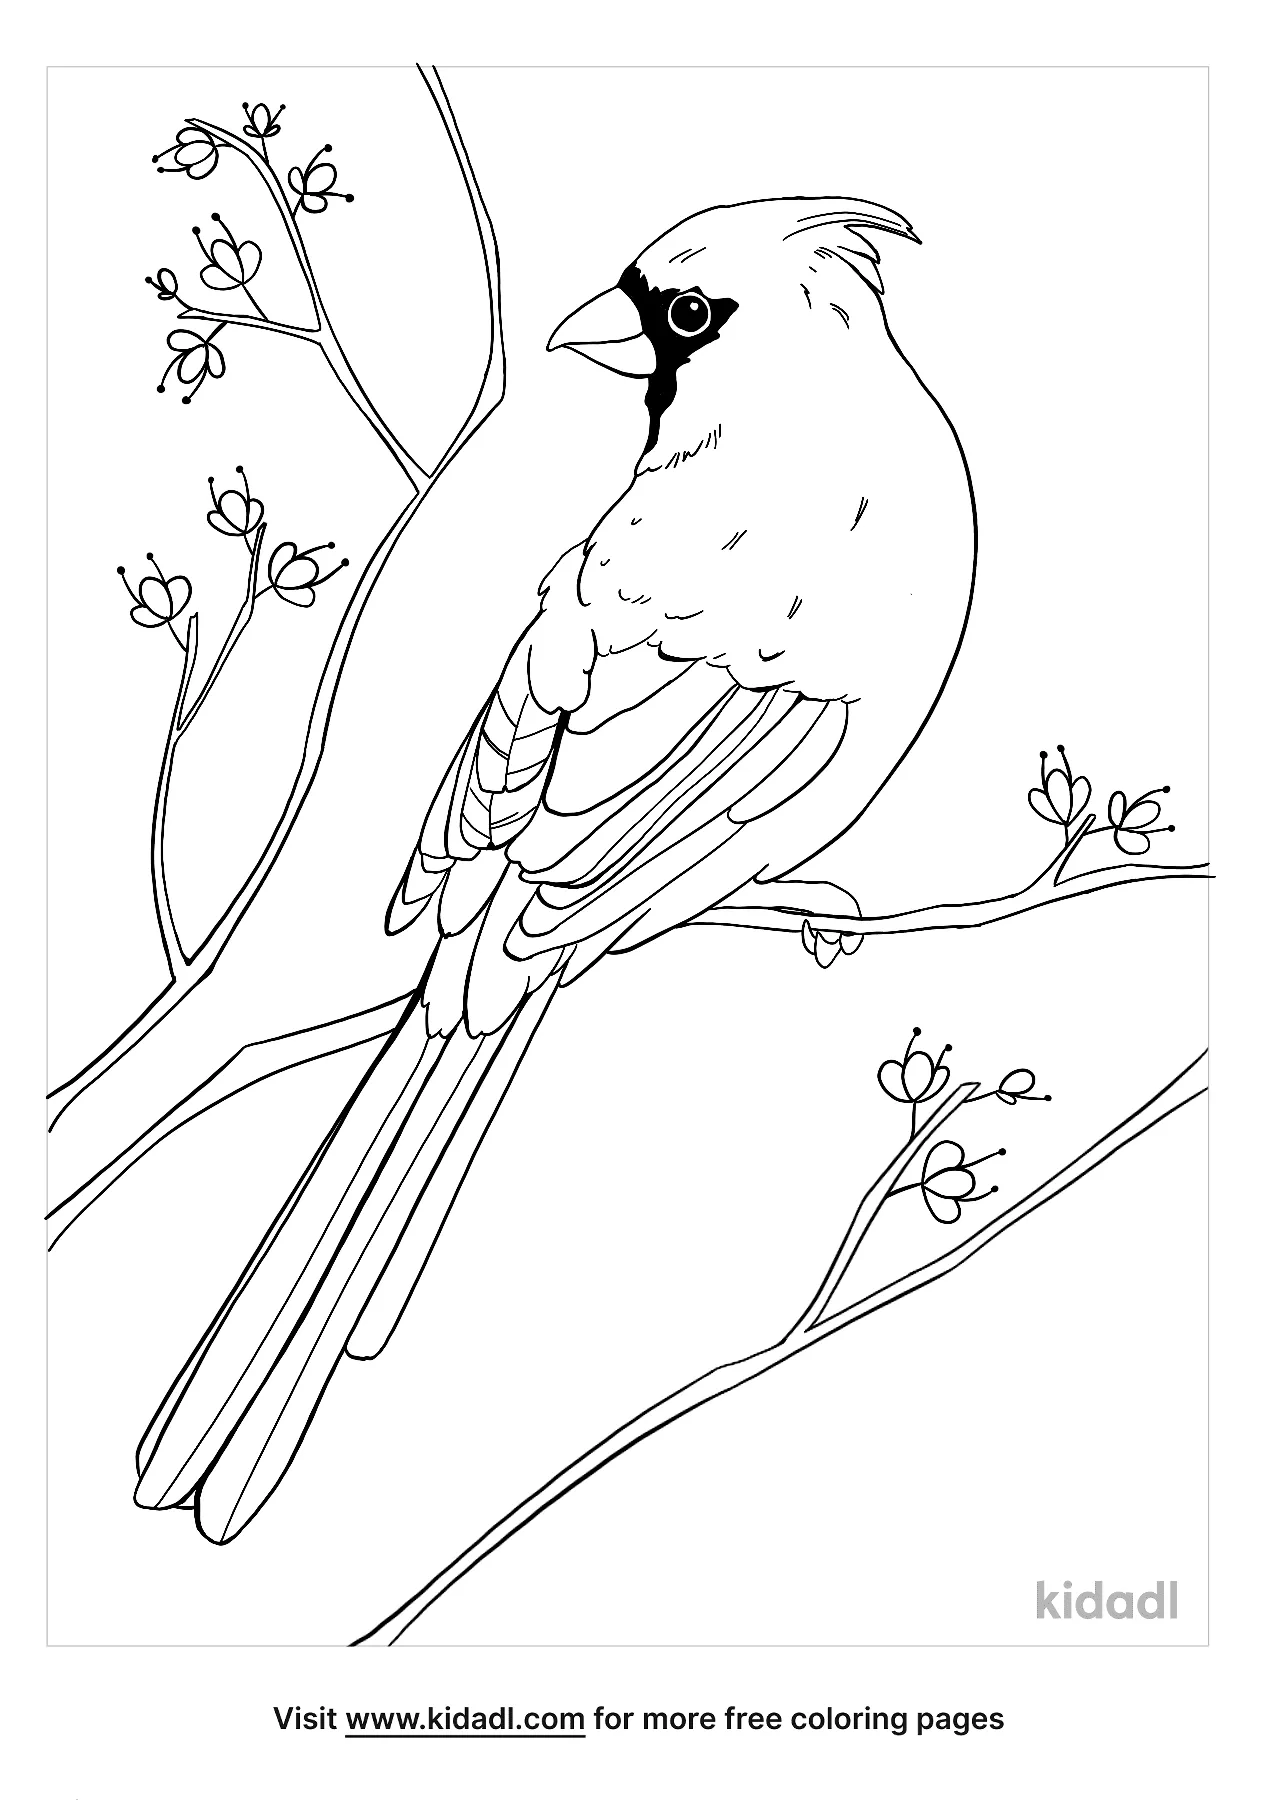 Cardinal Bird Coloring Pages   Free Birds Coloring Pages   Kidadl